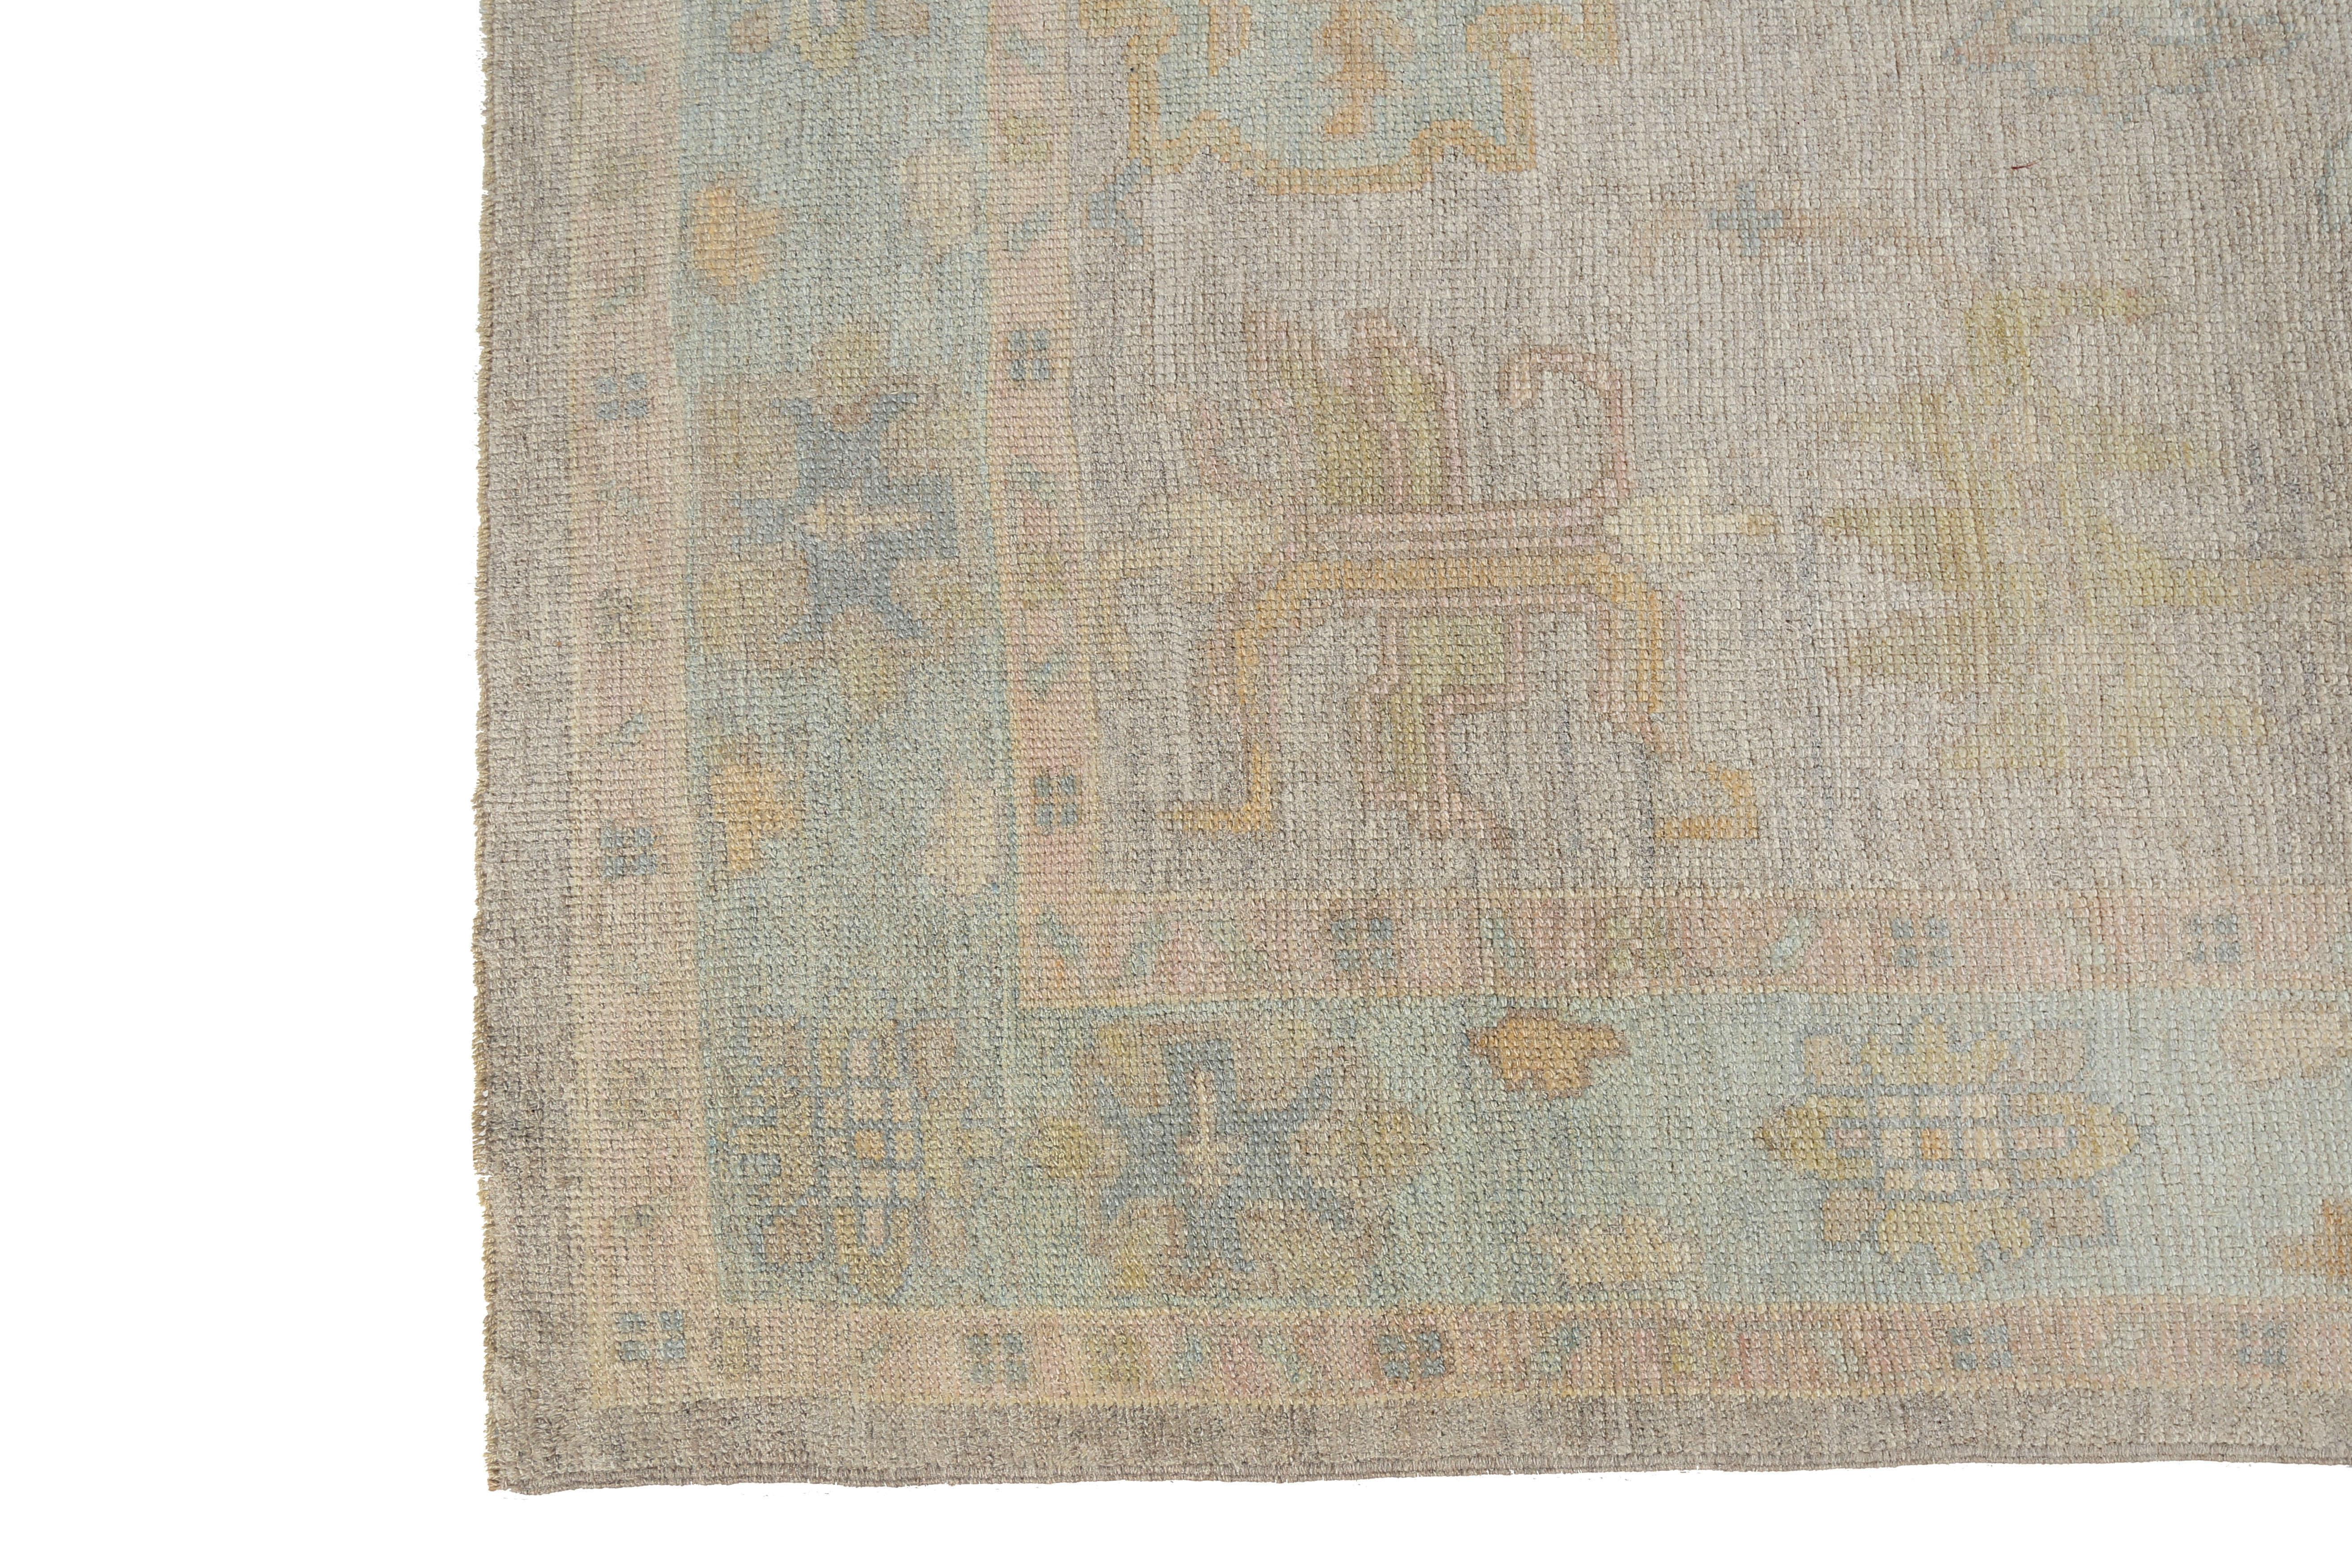 Introducing our exquisite handmade Turkish Oushak rug with a stunning grey background and a beautiful design featuring muted pastel colors of blue, pink, and green. The intricate patterns and soft colors of this rug make it the perfect addition to